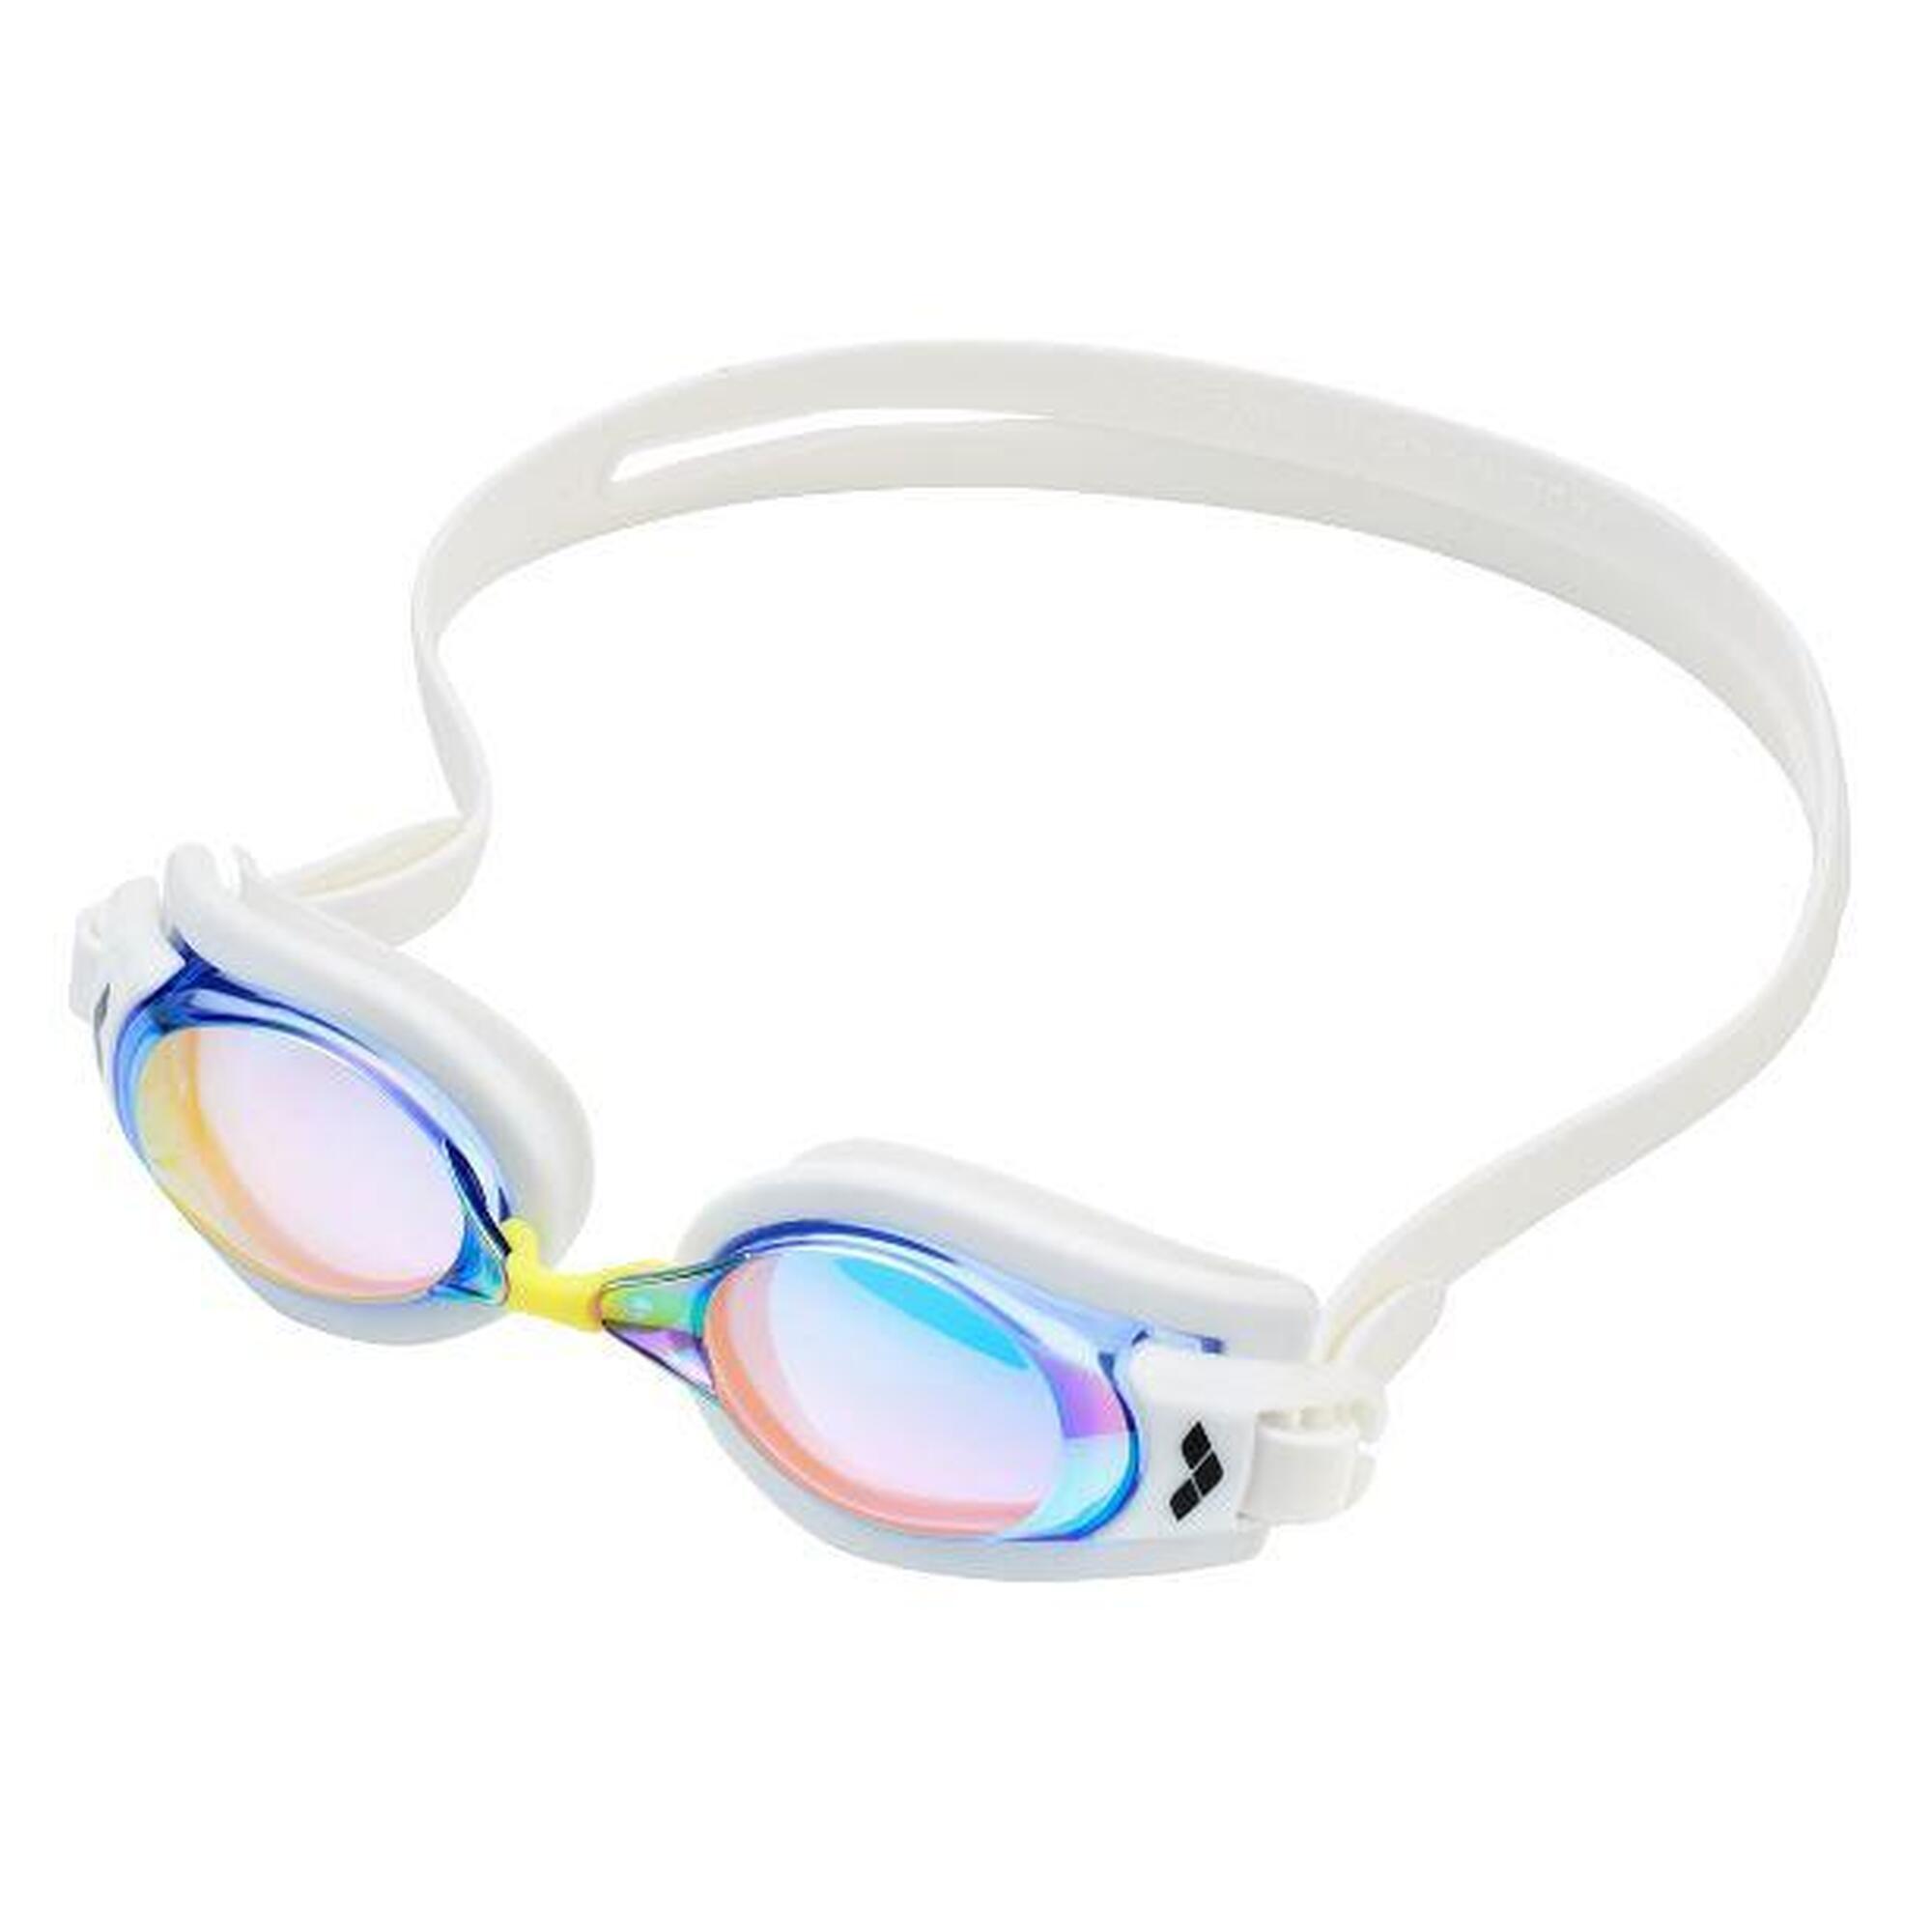 JAPAN MADE RE:NON 300 DIOPTERS OPTICAL MIRROR GOGGLE - WHITE